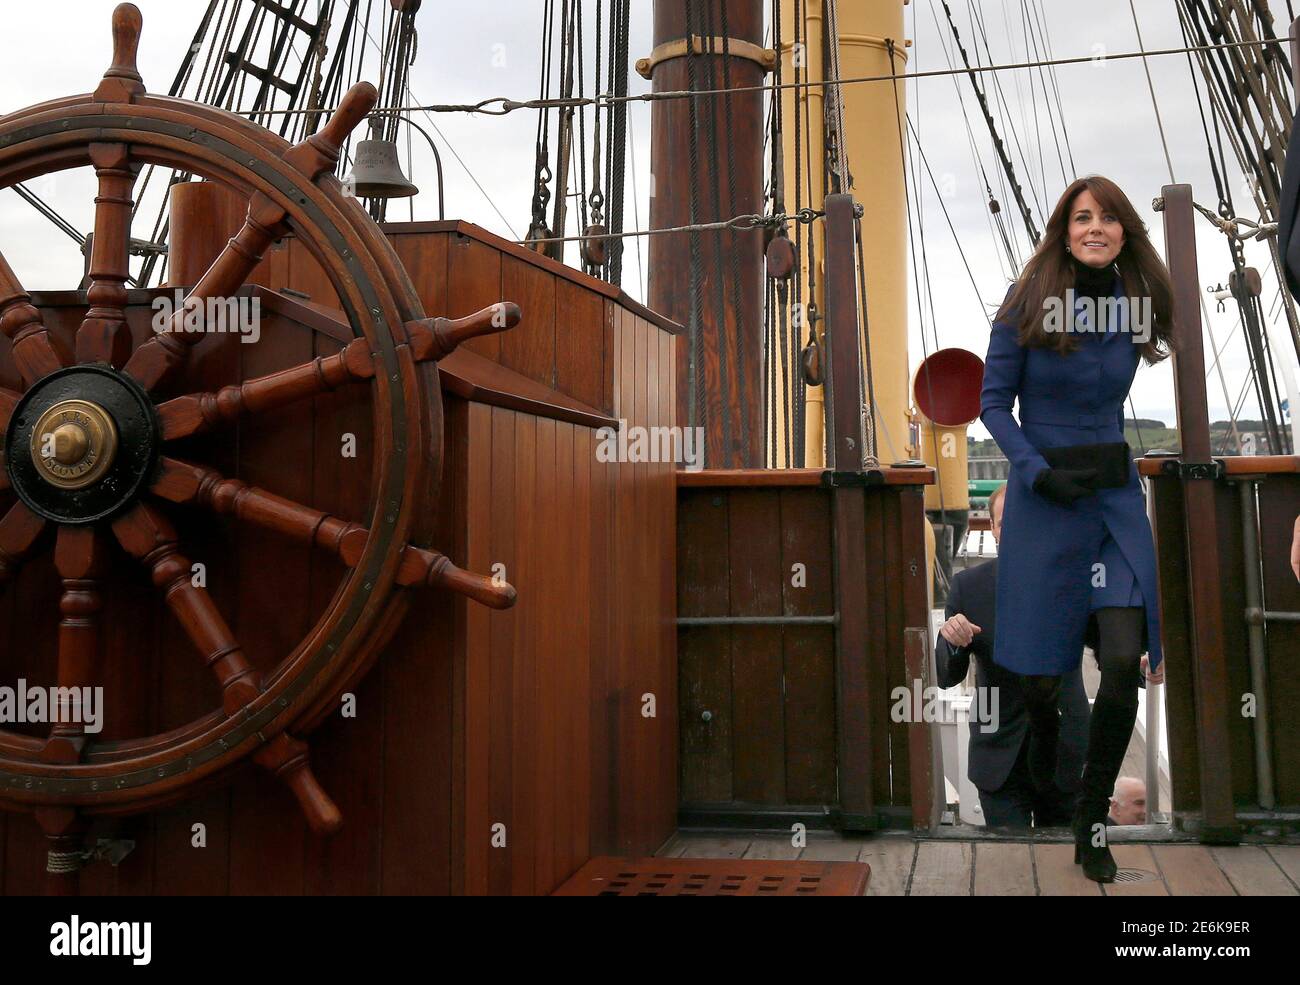 Britain's Prince William and his wife Catherine, Duchess of Cambridge tour the original Royal Research Ship Discovery during their visit to Dundee, Scotland, Britain October 23, 2015.  REUTERS/Danny Lawson/Pool Stock Photo